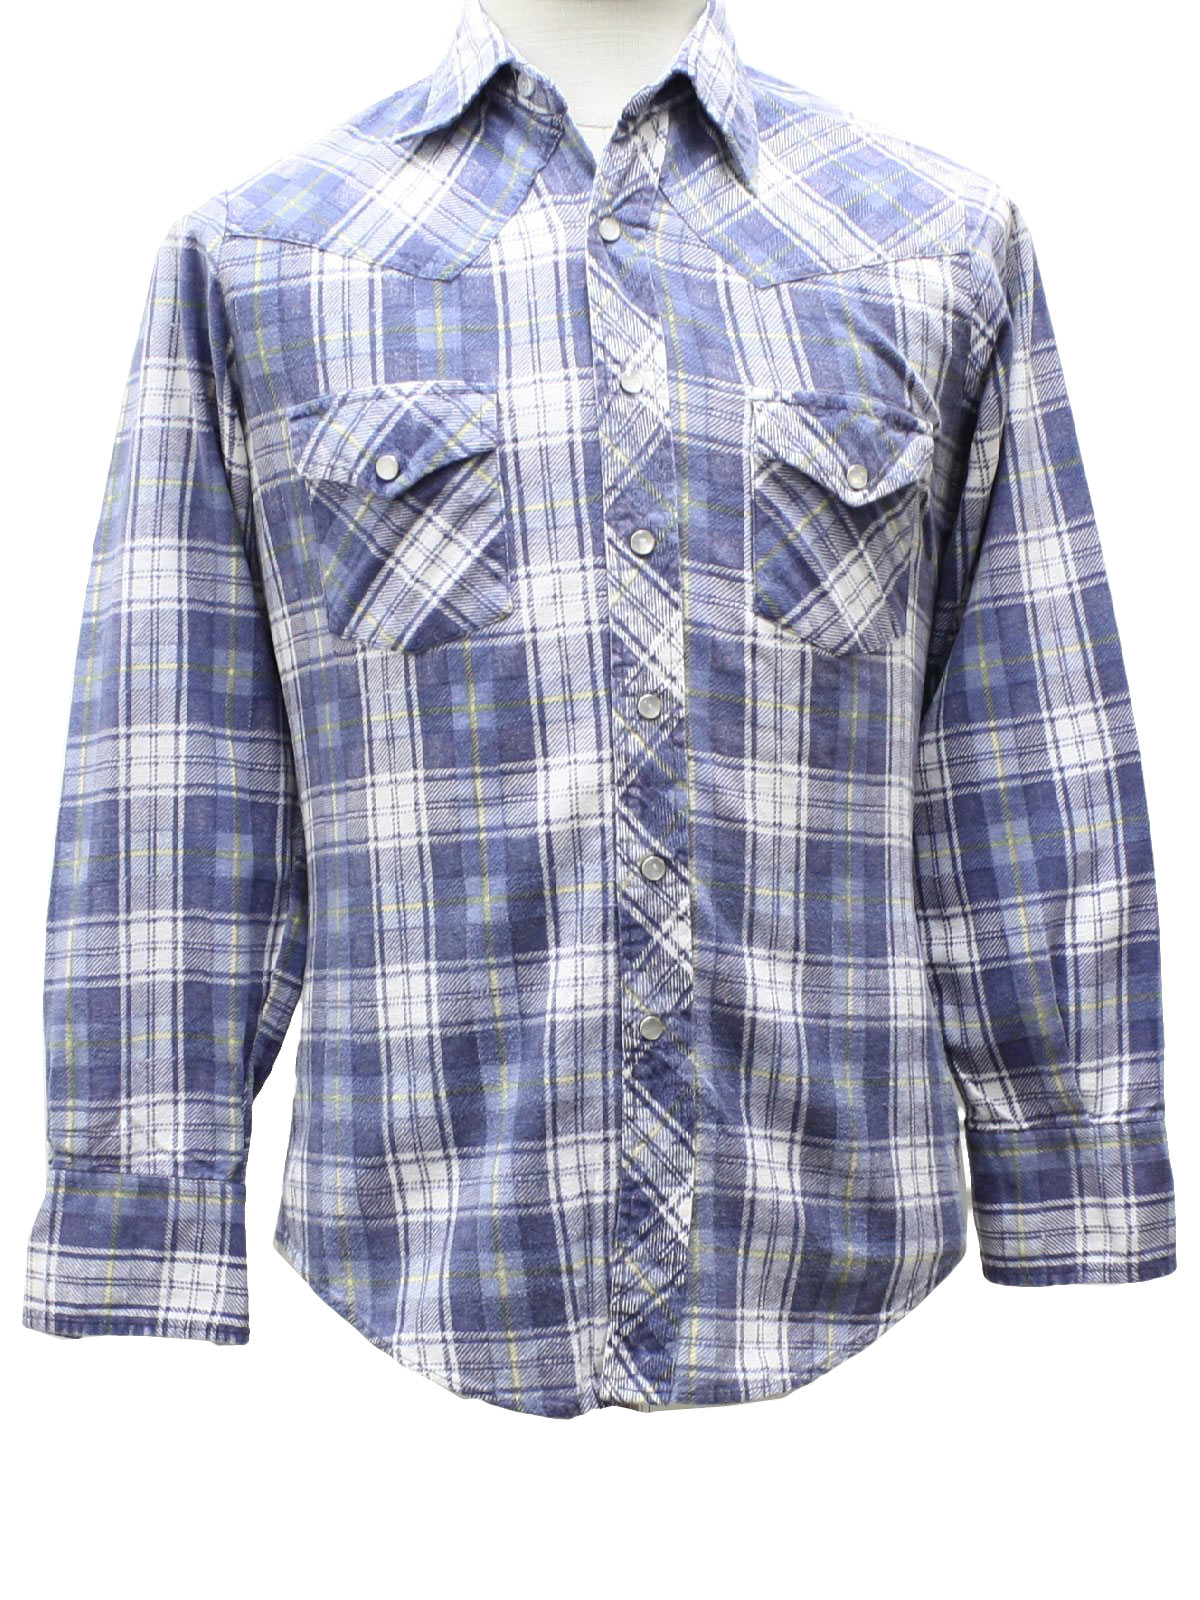 70s Vintage BJ R Western Shirt: 70s -BJ R- Mens shaded blue, white and ...